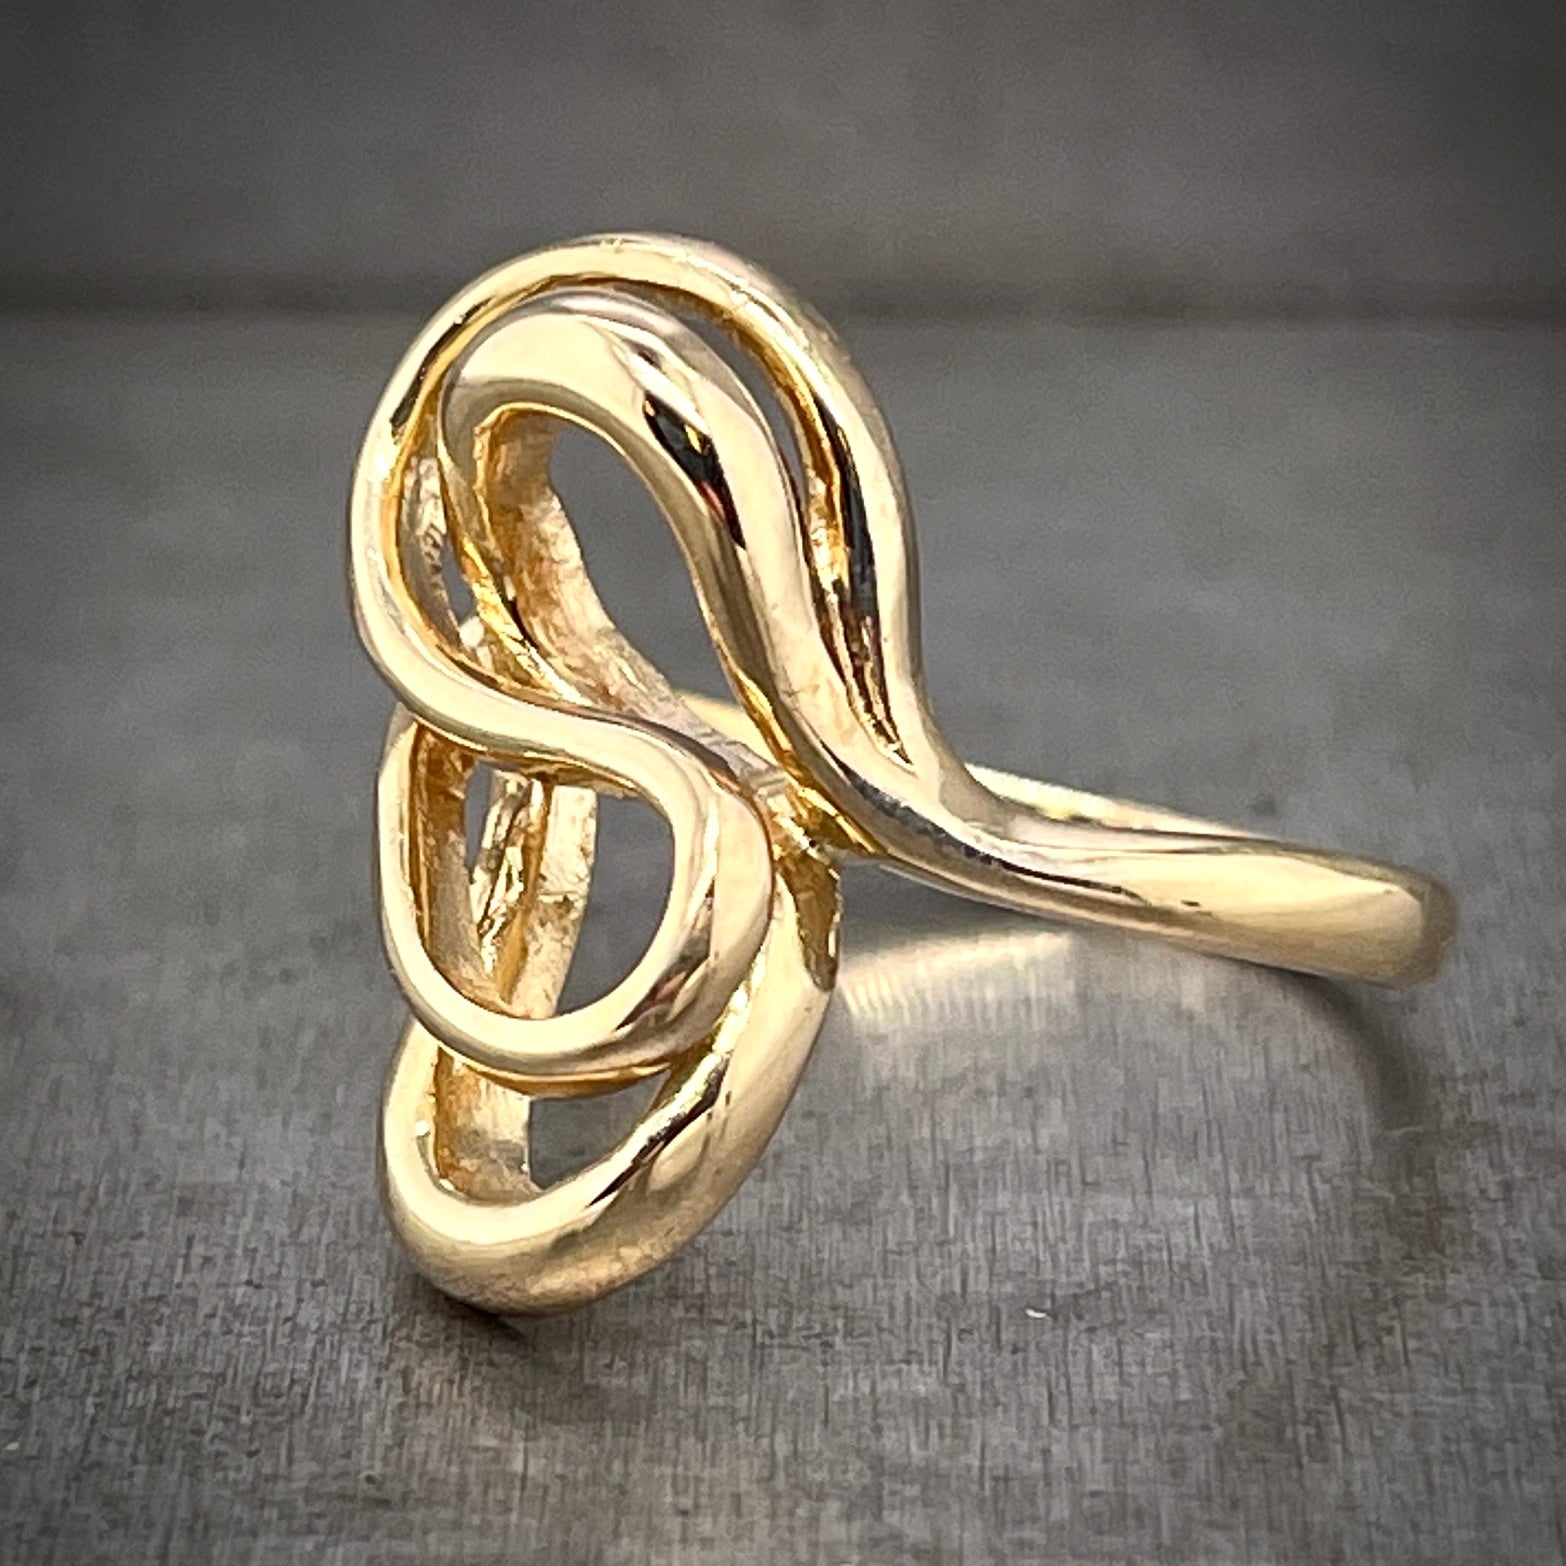 3/4 side profile of abstract gold ring. Here you can see the shank of the ring is one strand of gold wire.